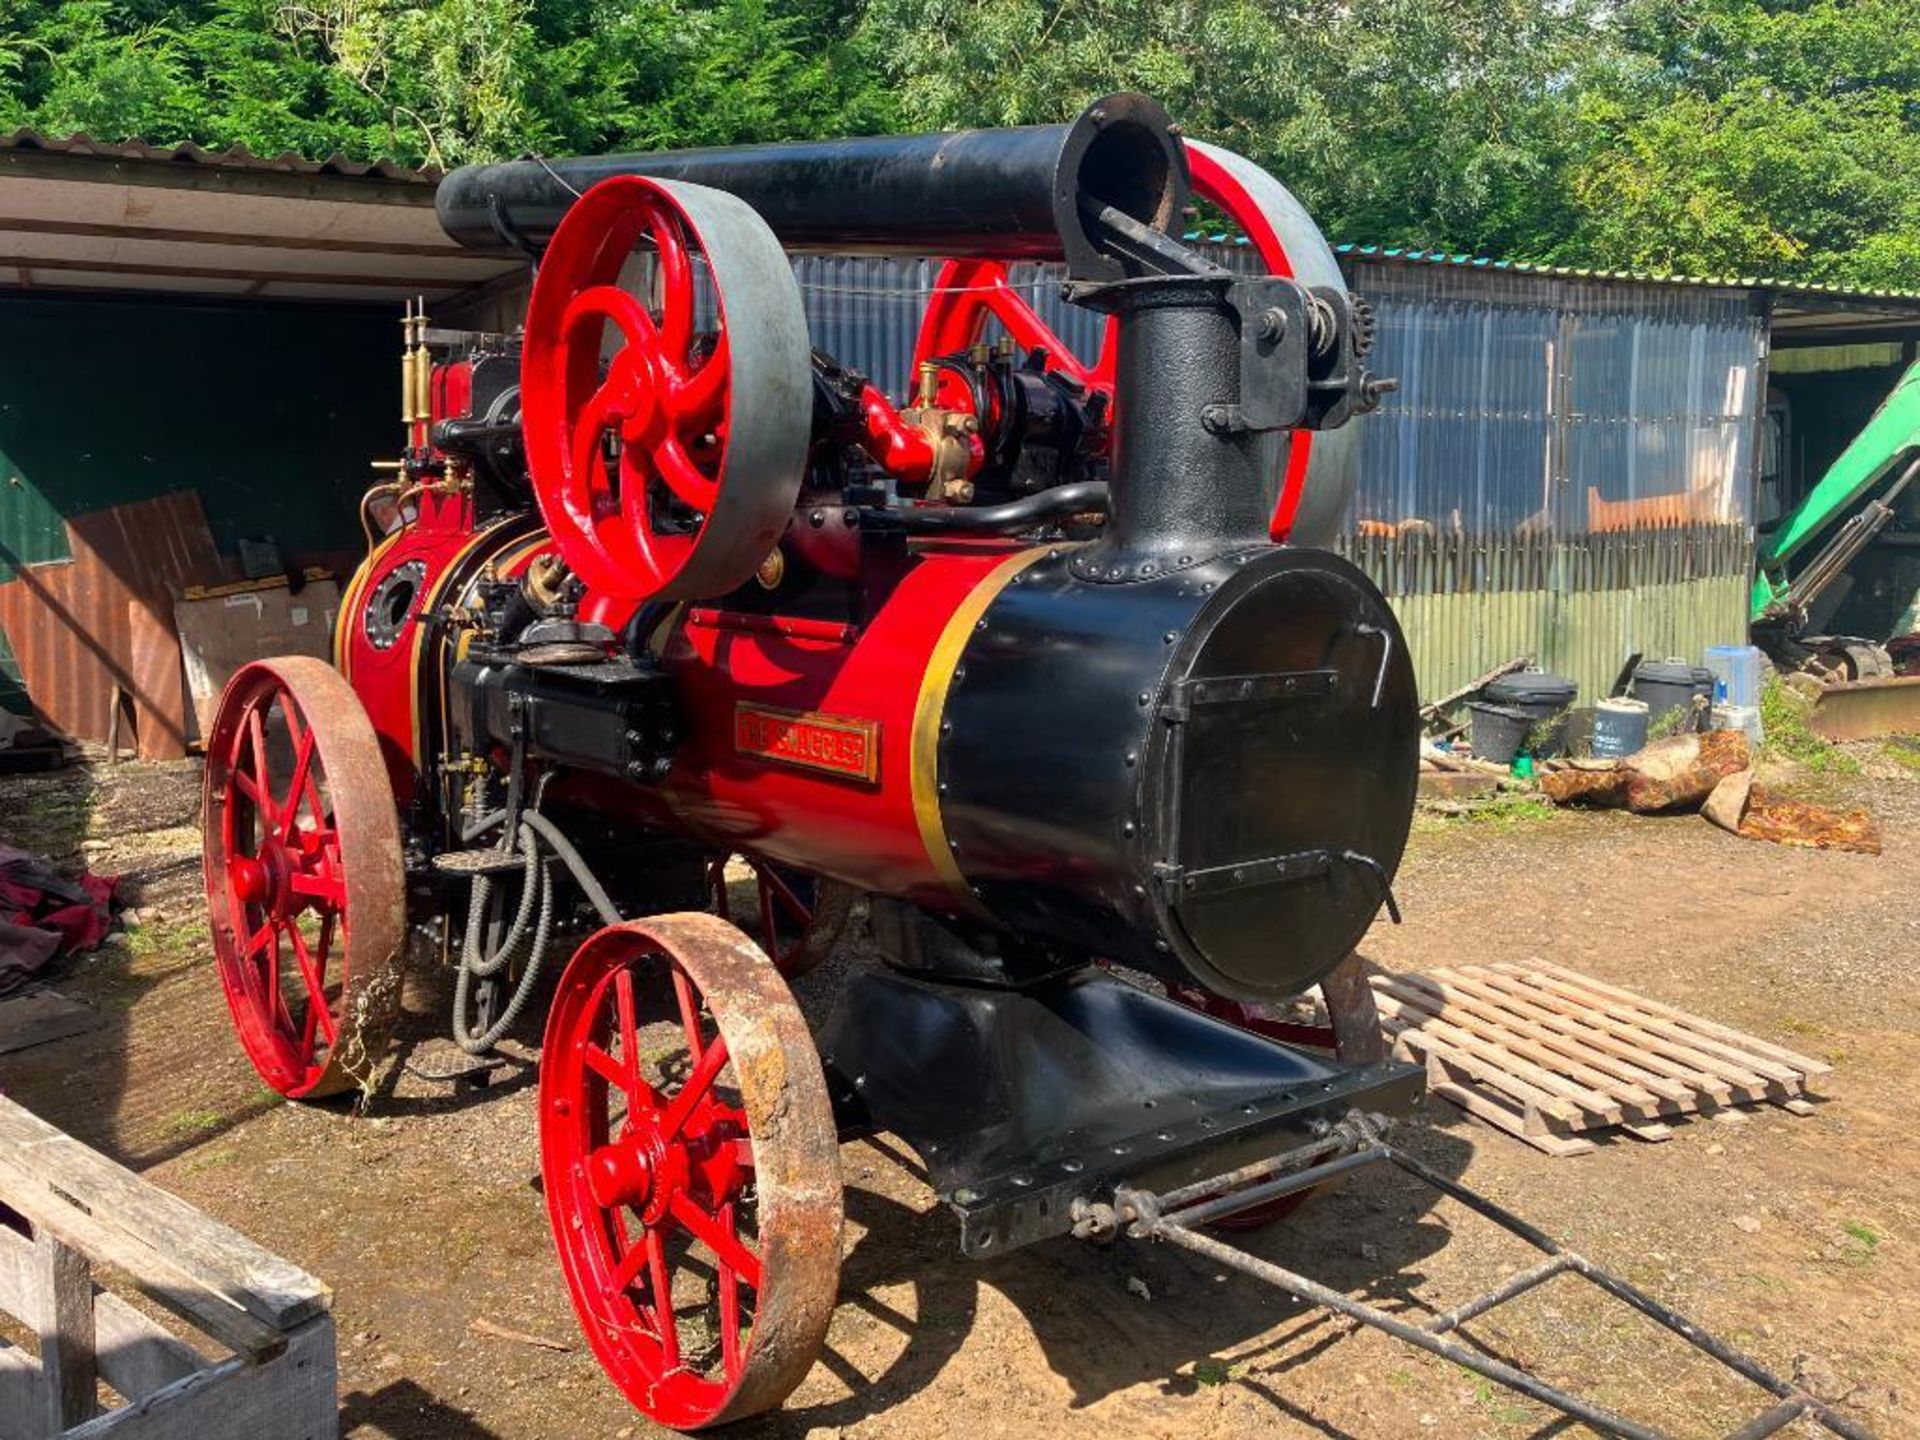 1930 Marshall Sons & Co of Gainsborough 6NHP Portable single cylinder steam engine "The Smuggler". I